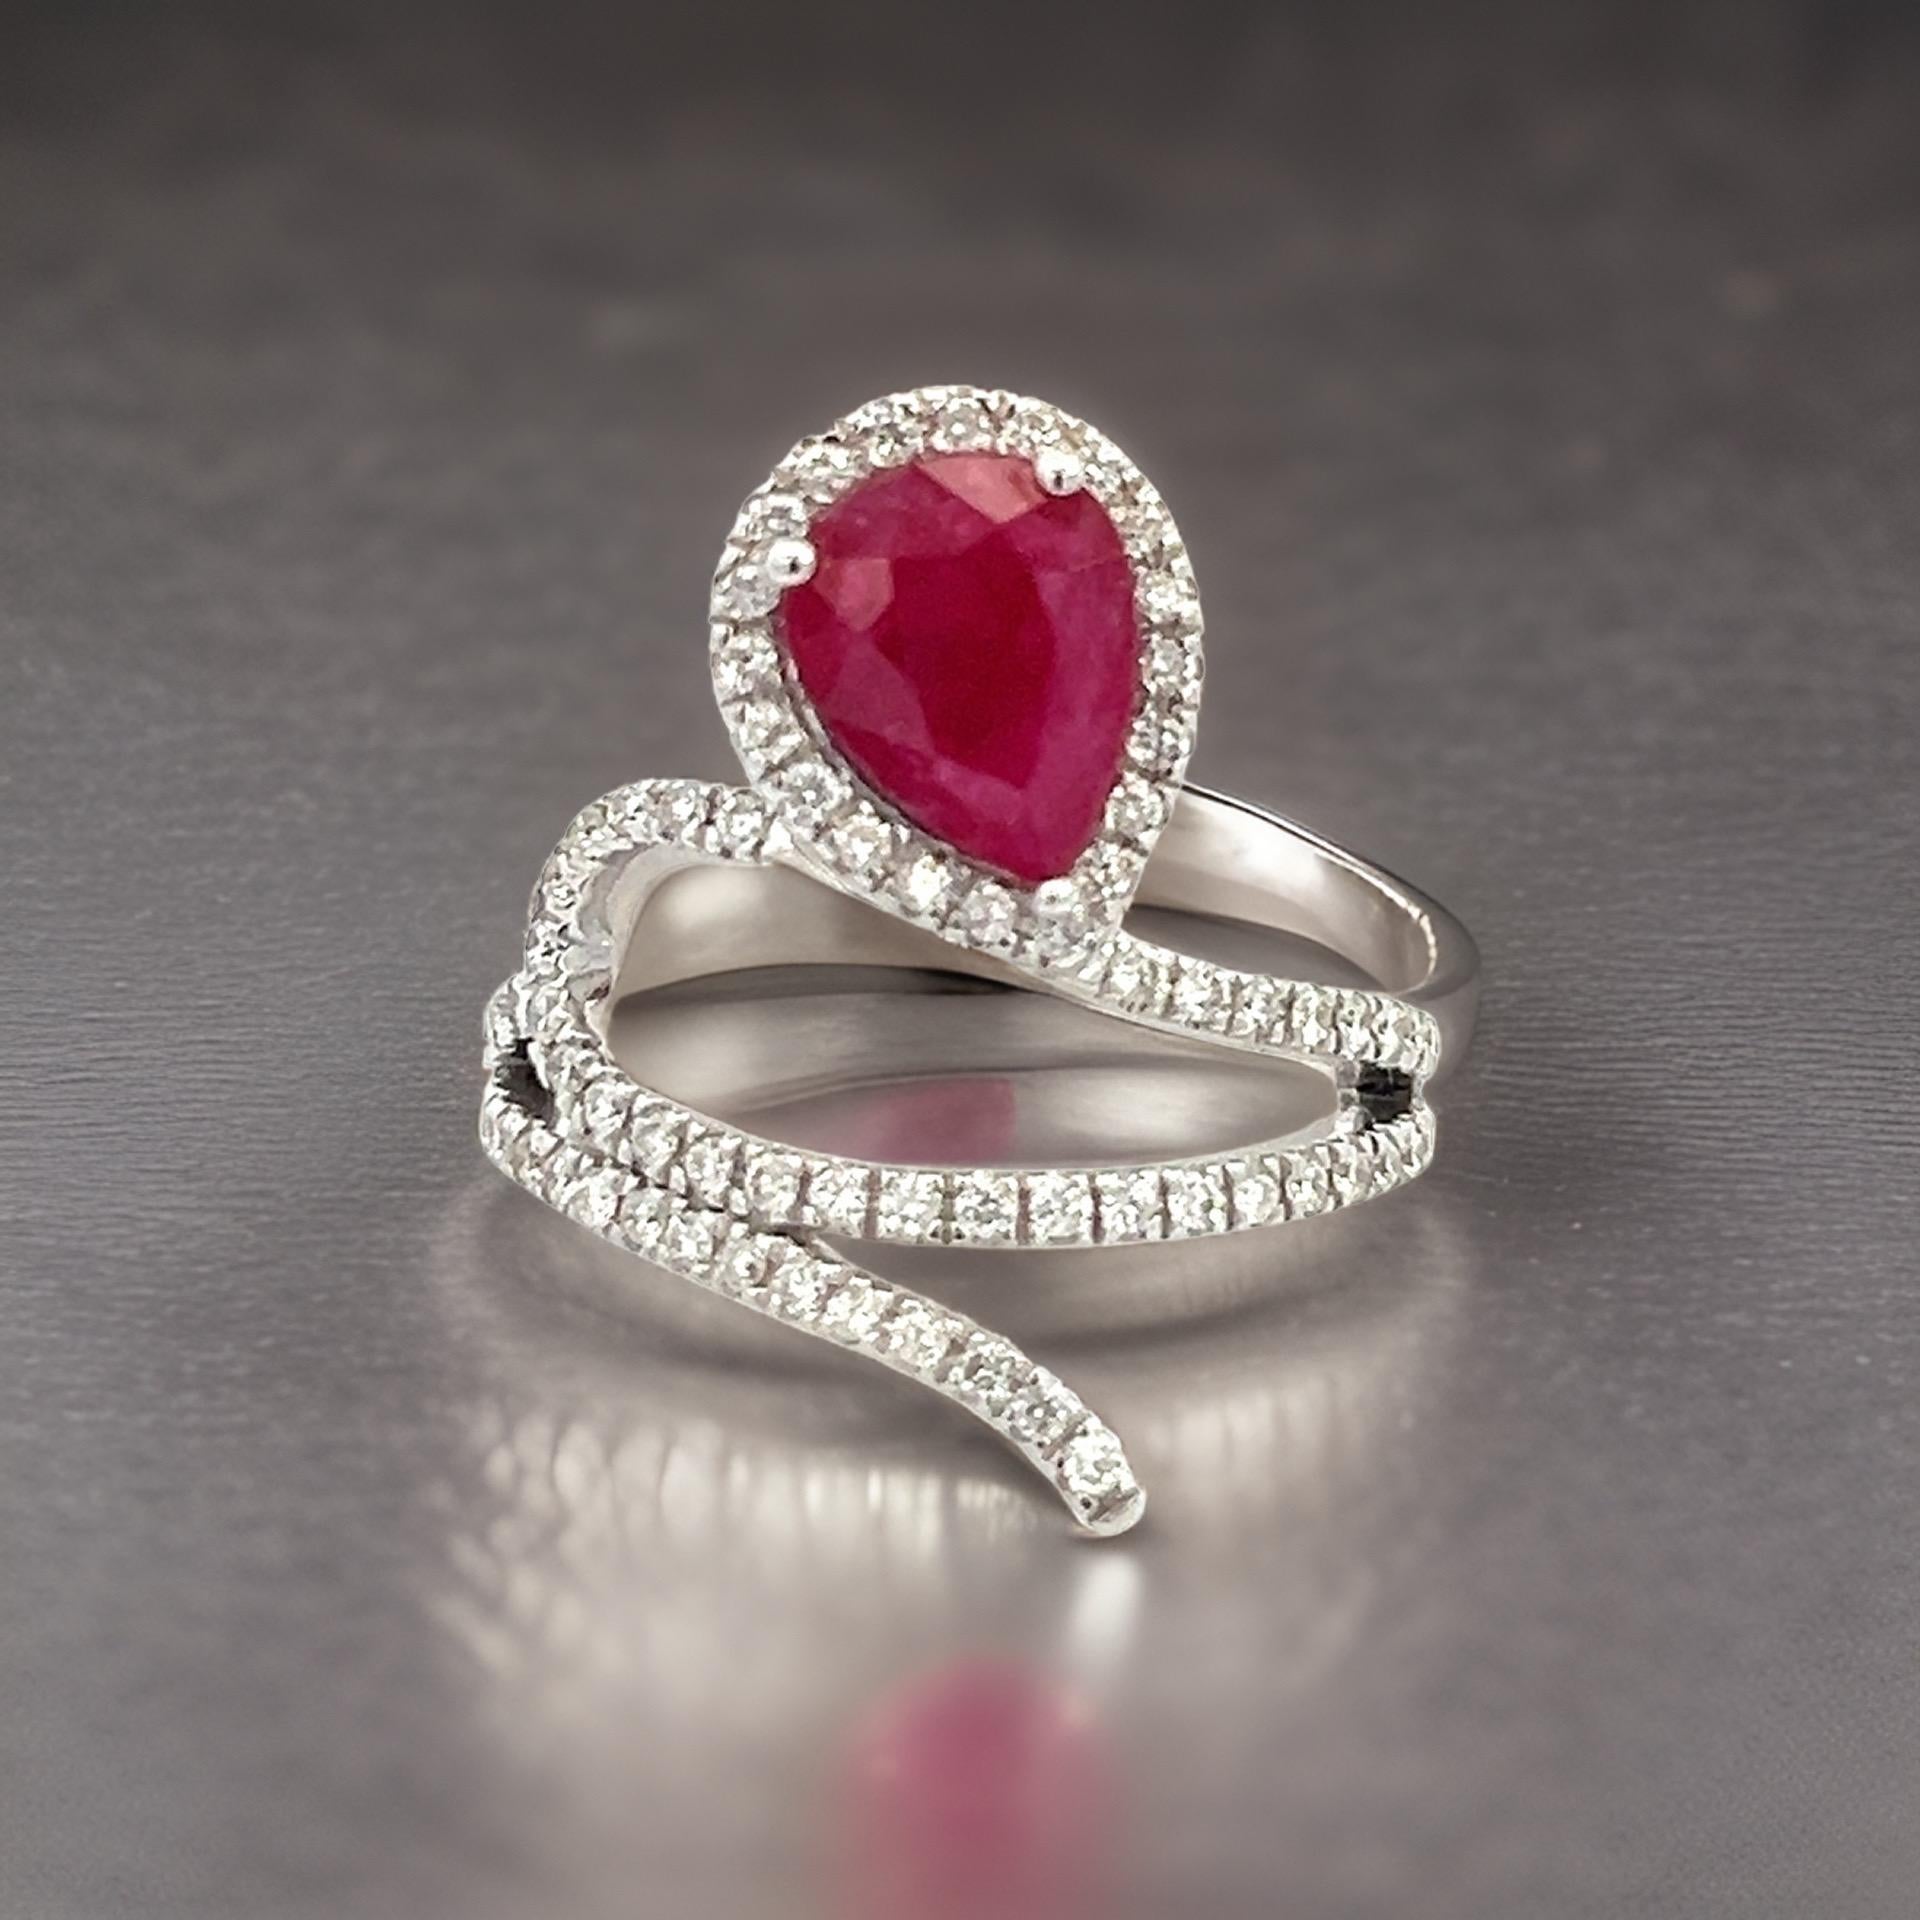 Natural Ruby Diamond Ring 6.75 14k W Gold 2.32 TCW Certified For Sale 13